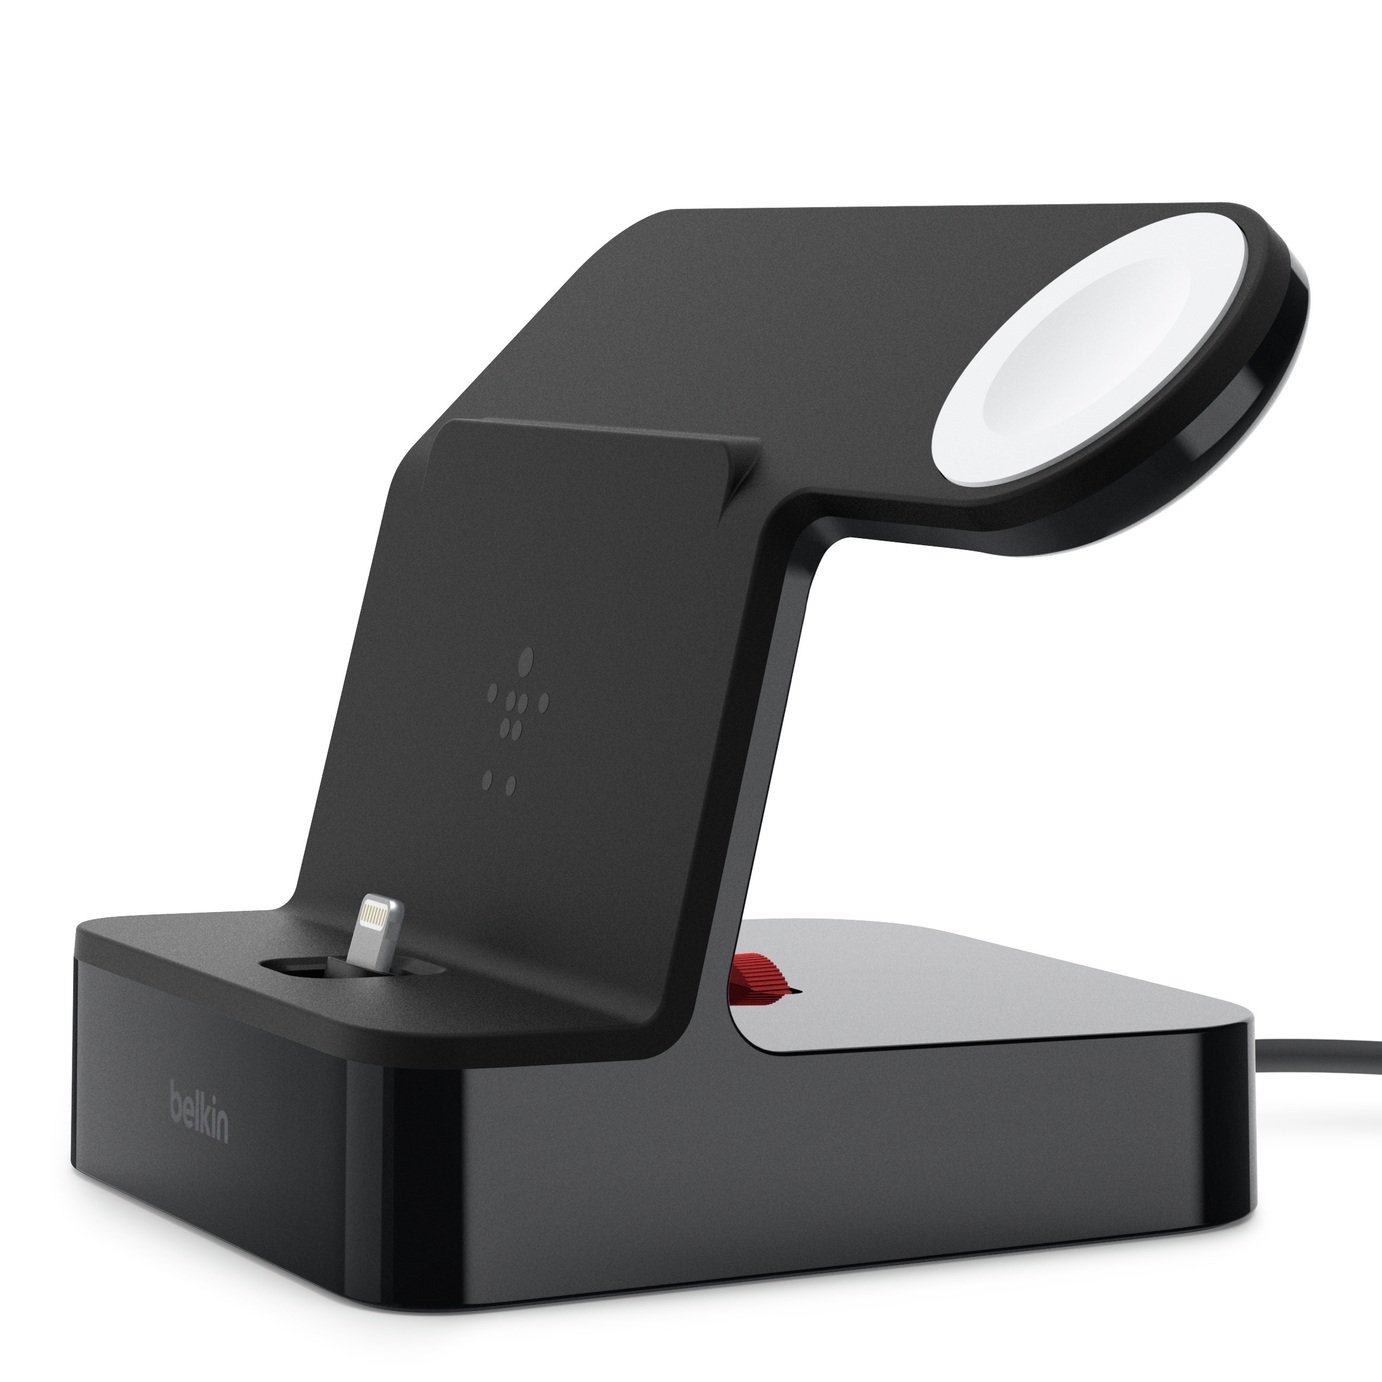 Belkin Charging Dock for iPhone and Apple Watch - Black